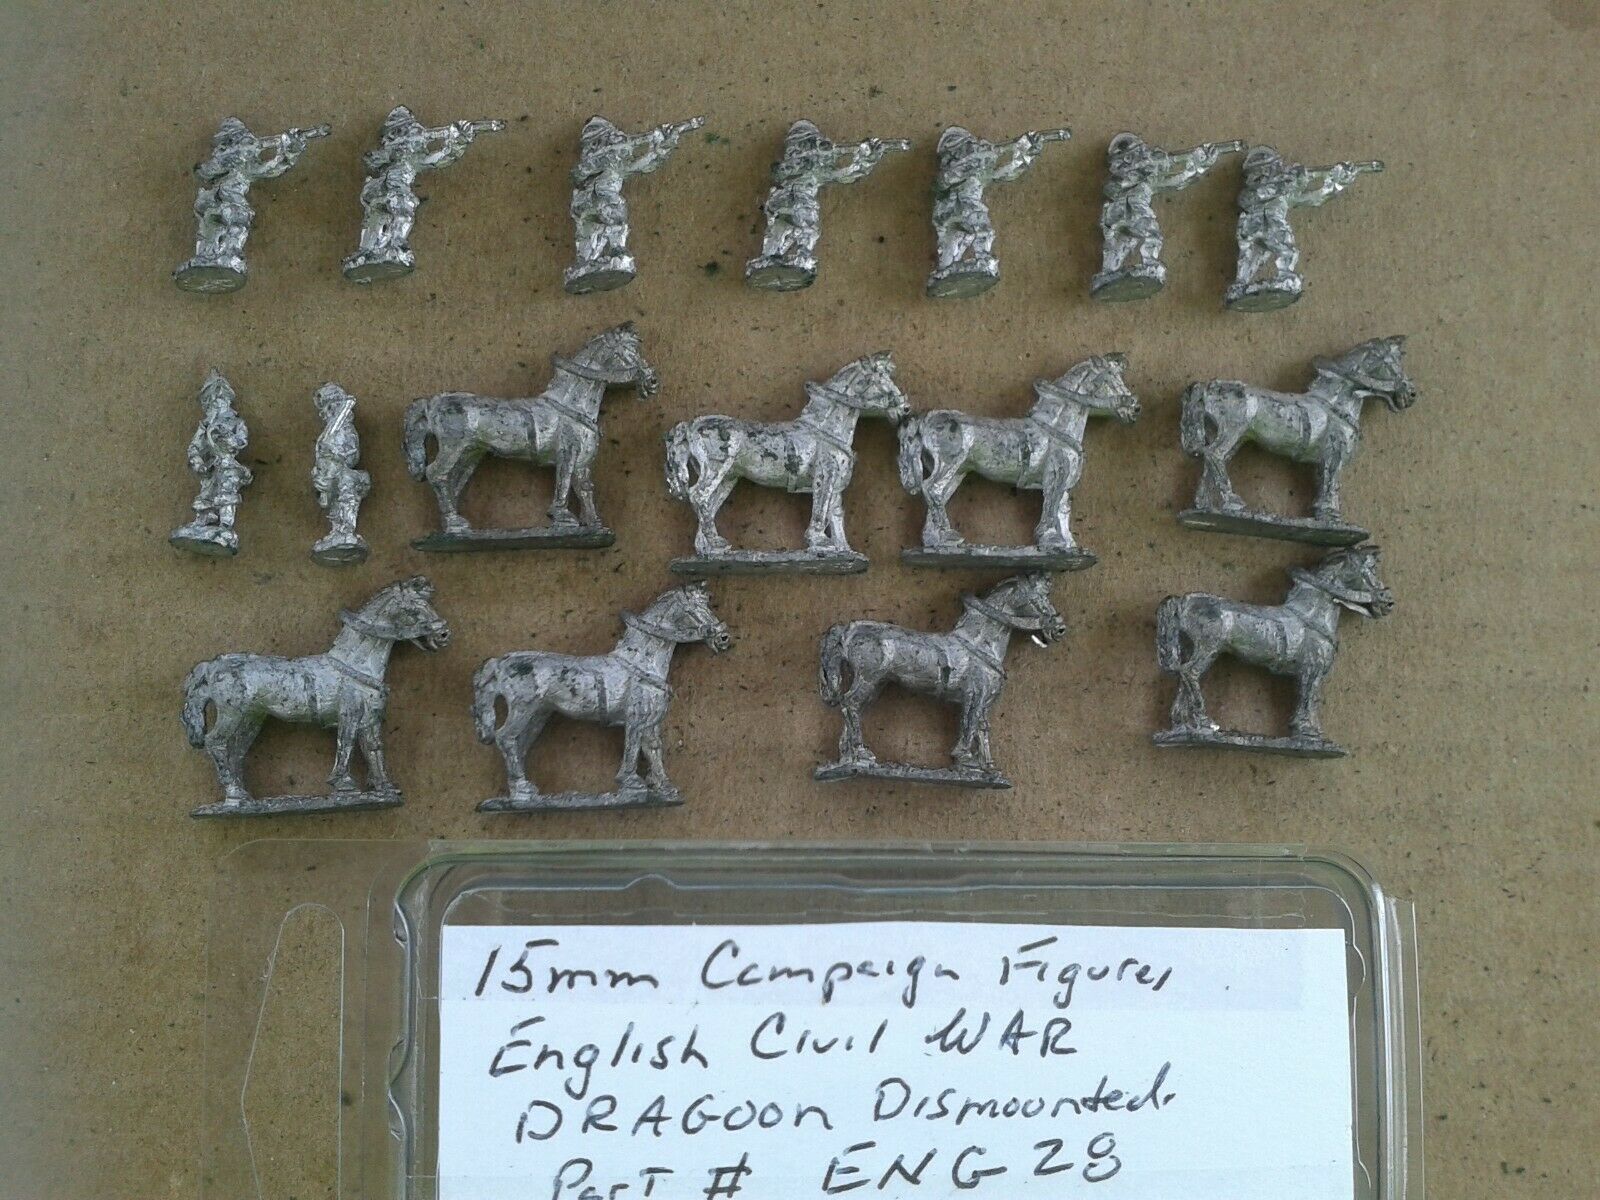 15mm Campaign Figures English Civil War Dismounted Dragoons